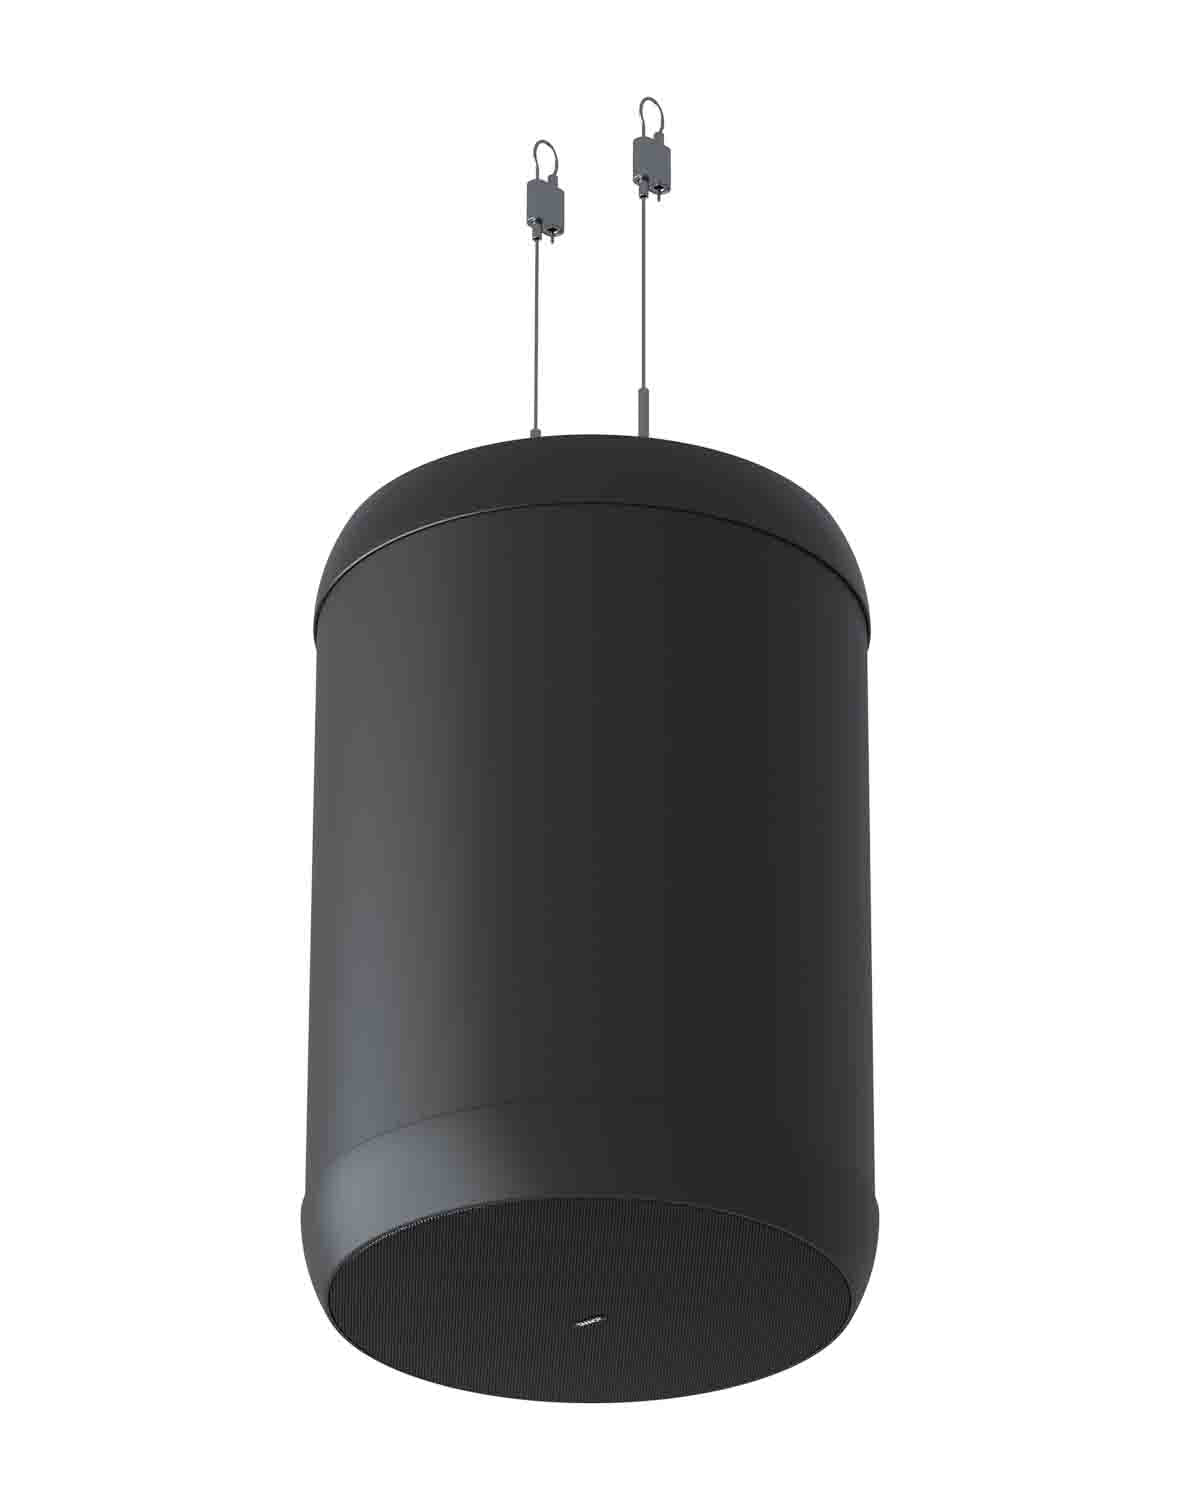 Tannoy OCV 8, 8-Inch Coaxial Pendant Loudspeaker for Installation Applications - Hollywood DJ